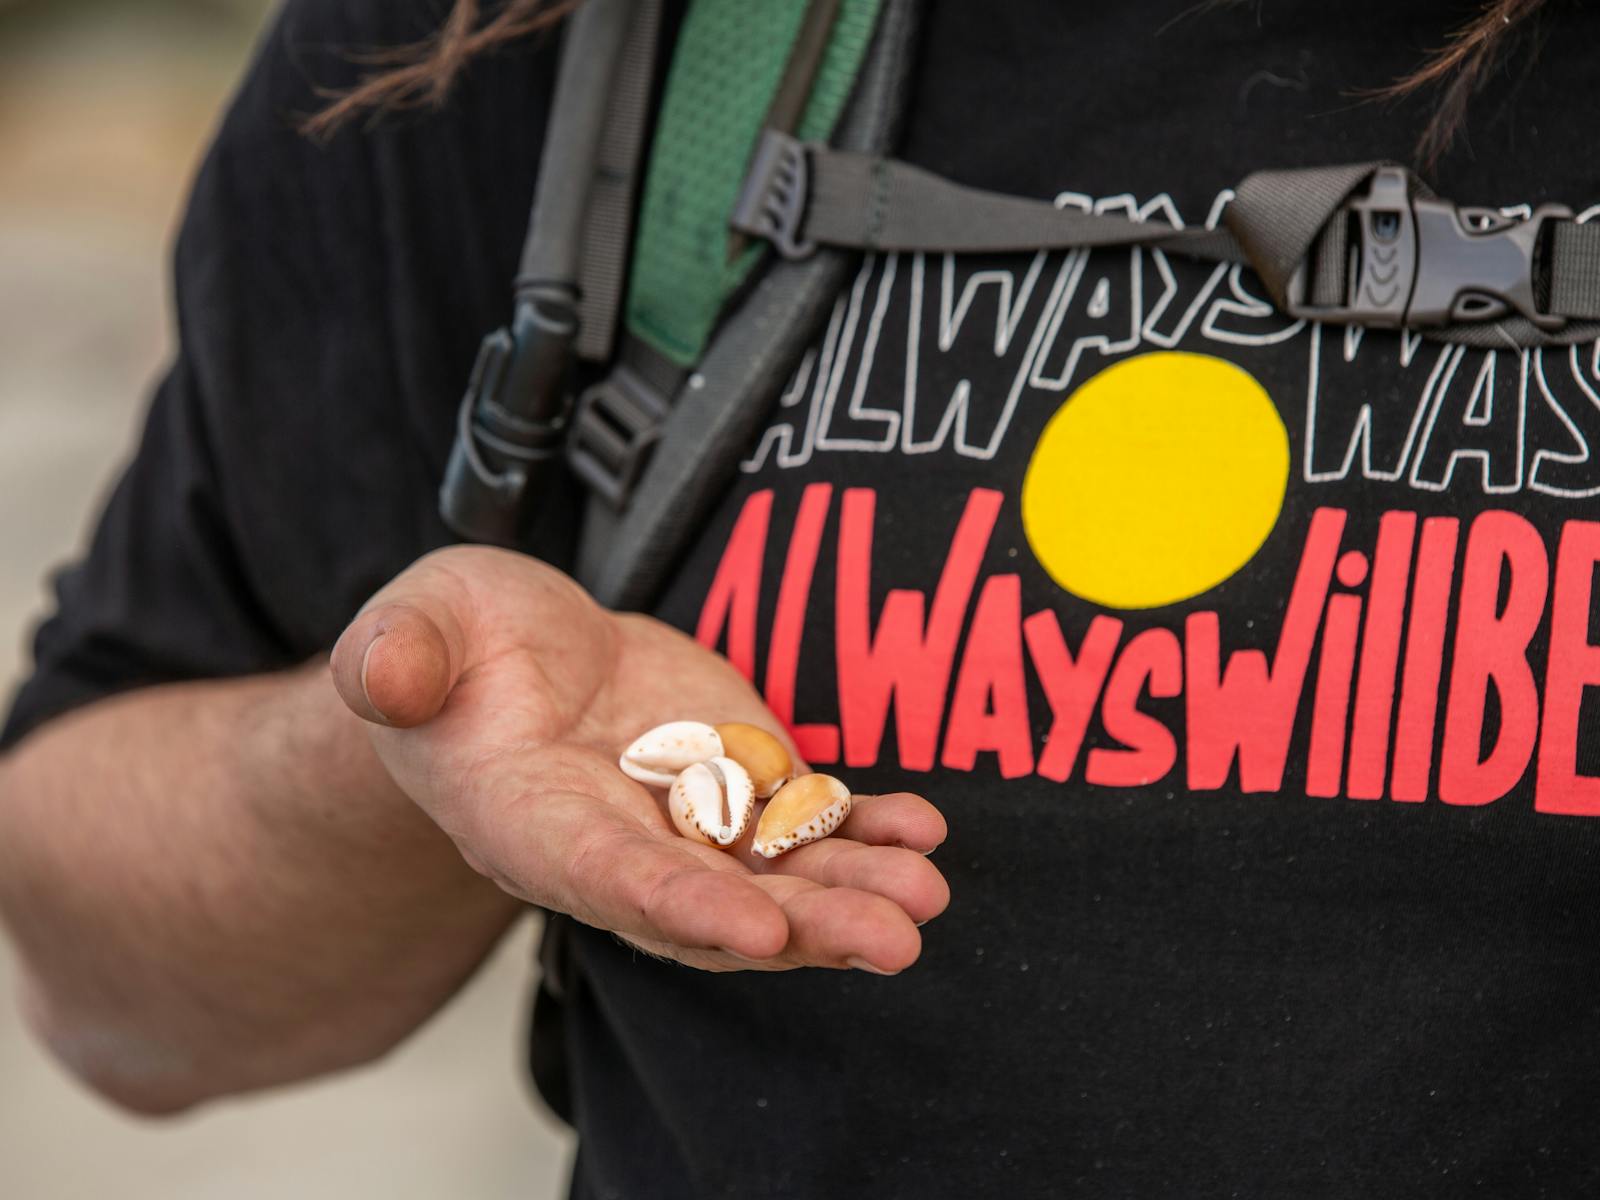 wukalina Walk is a palawa owned and guided walking and cultural experience in NE lutruwita/Tas